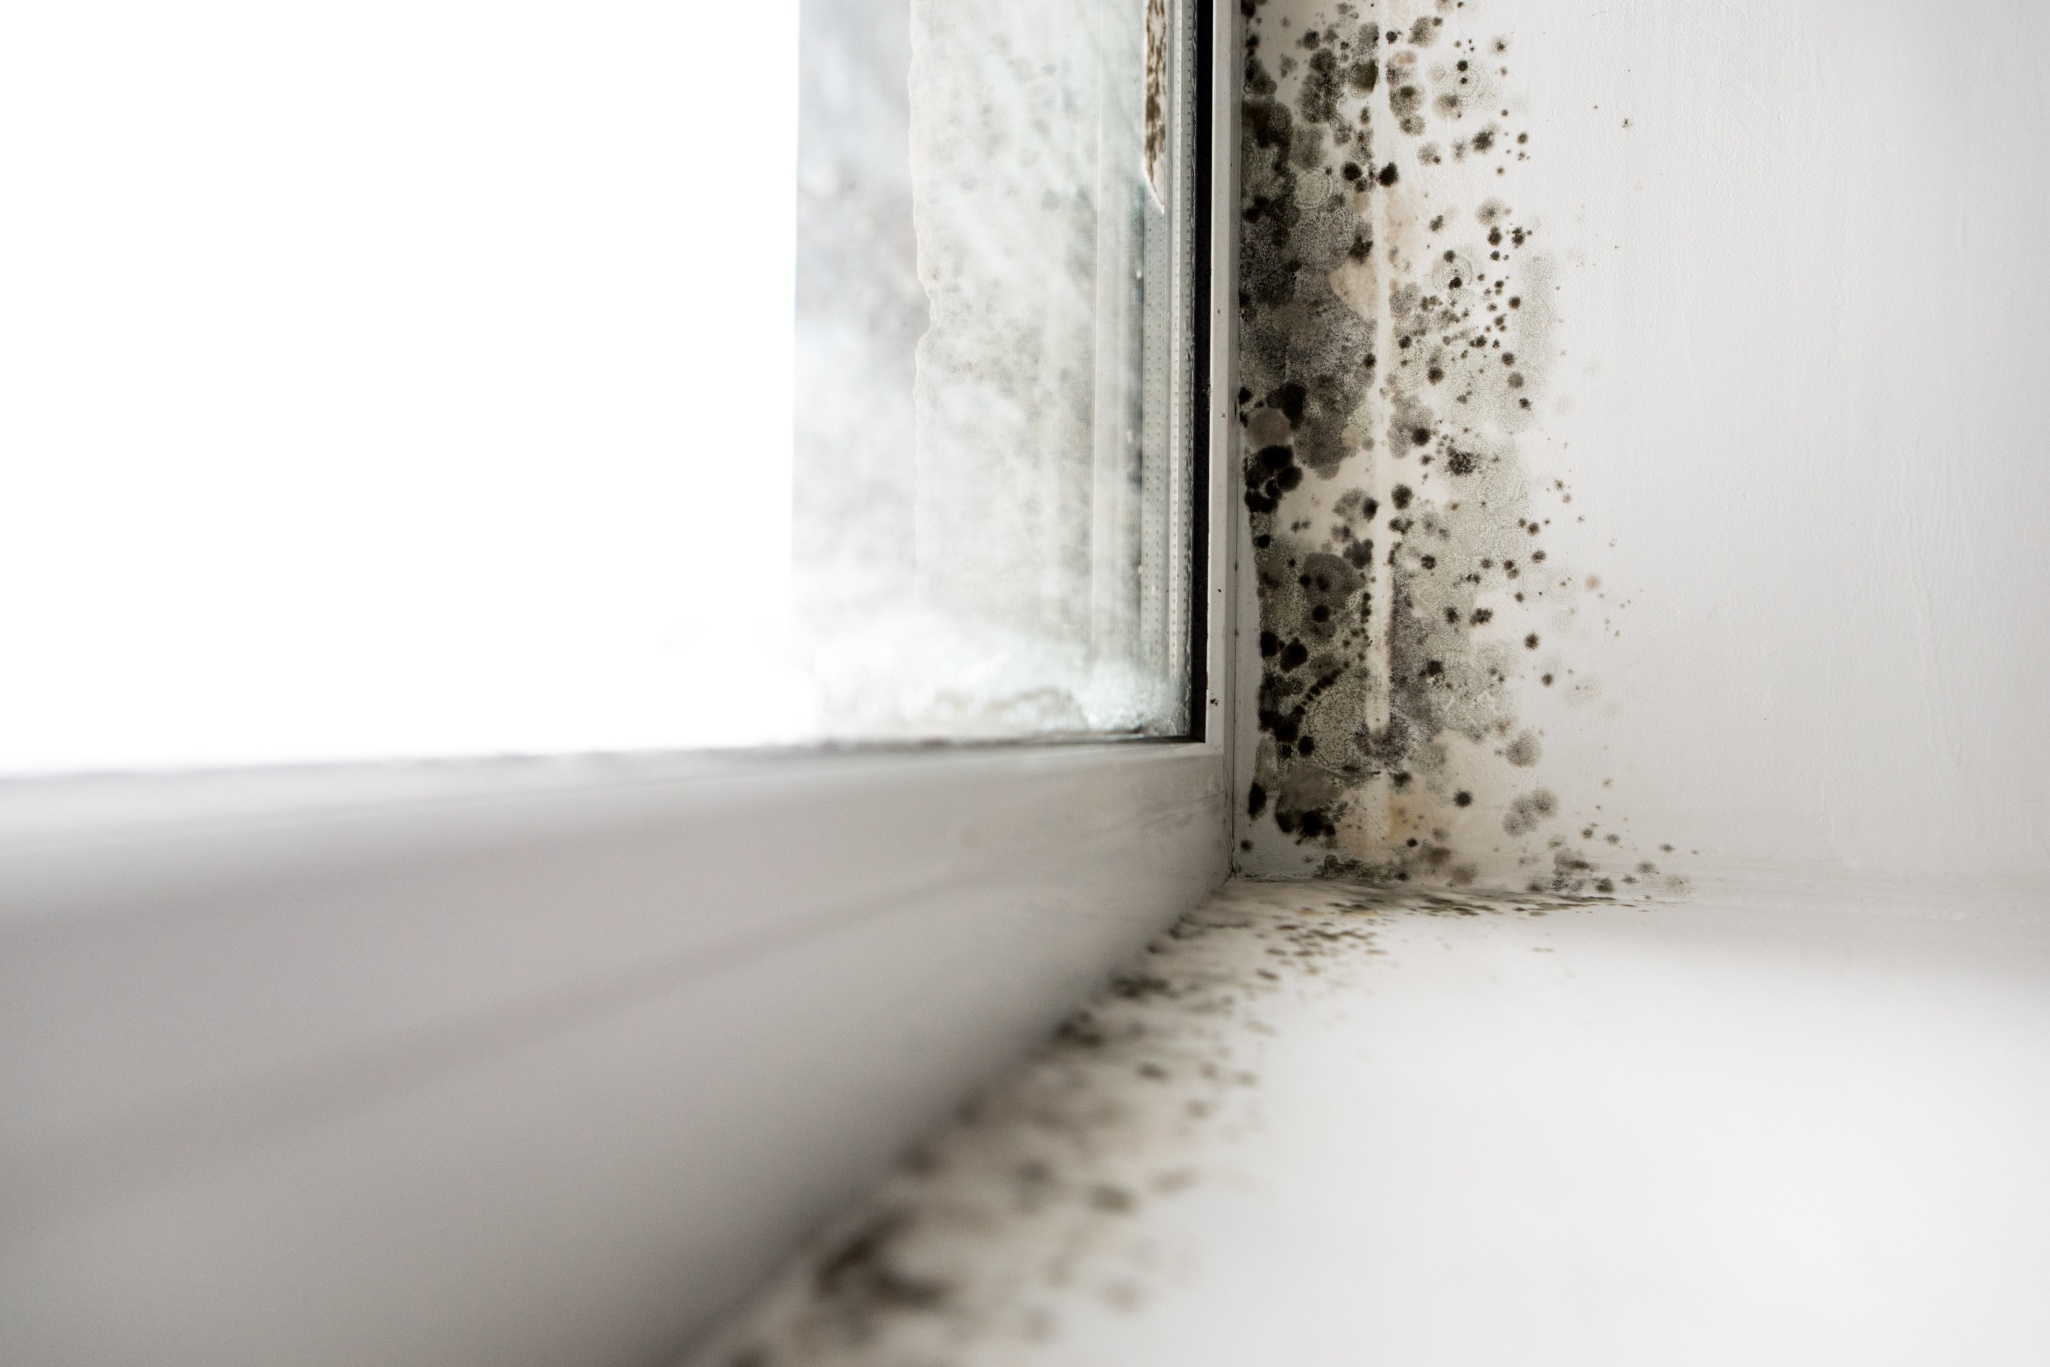 Mould and condensation near window